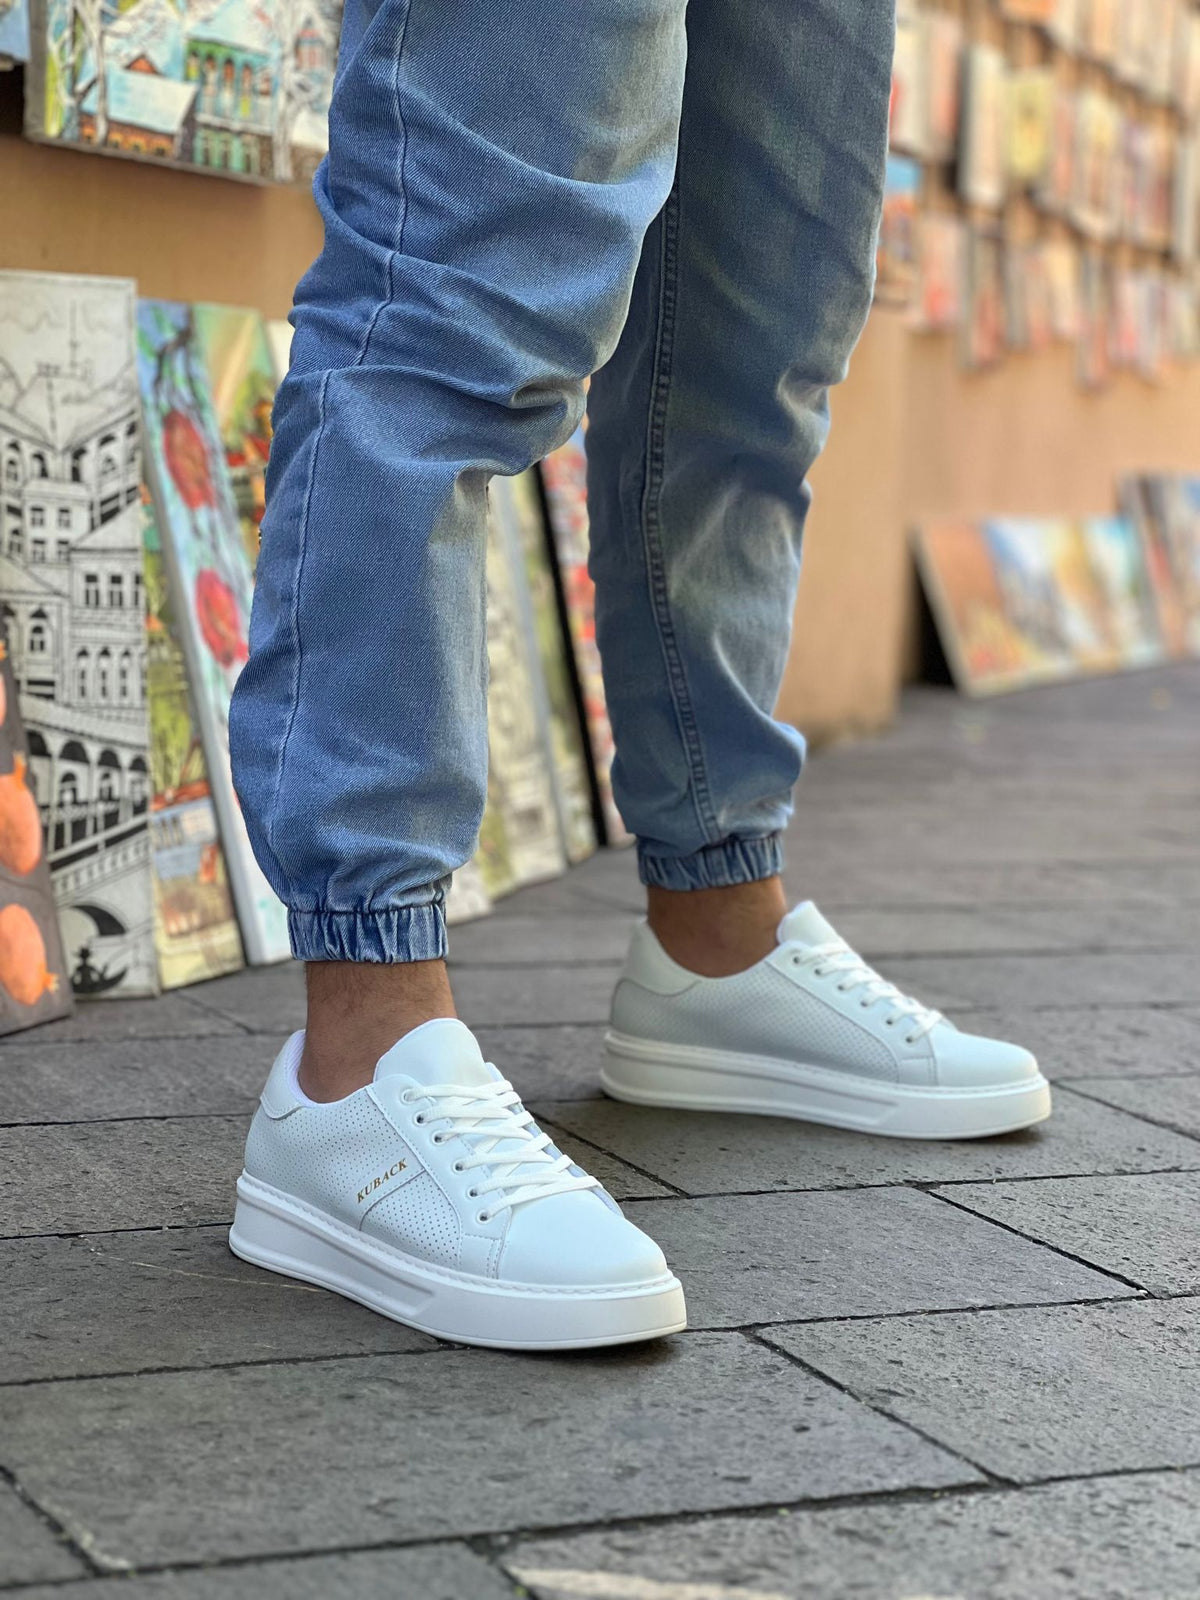 KB-036 Lace-Up White Casual Men's Sneakers Shoes - STREETMODE™